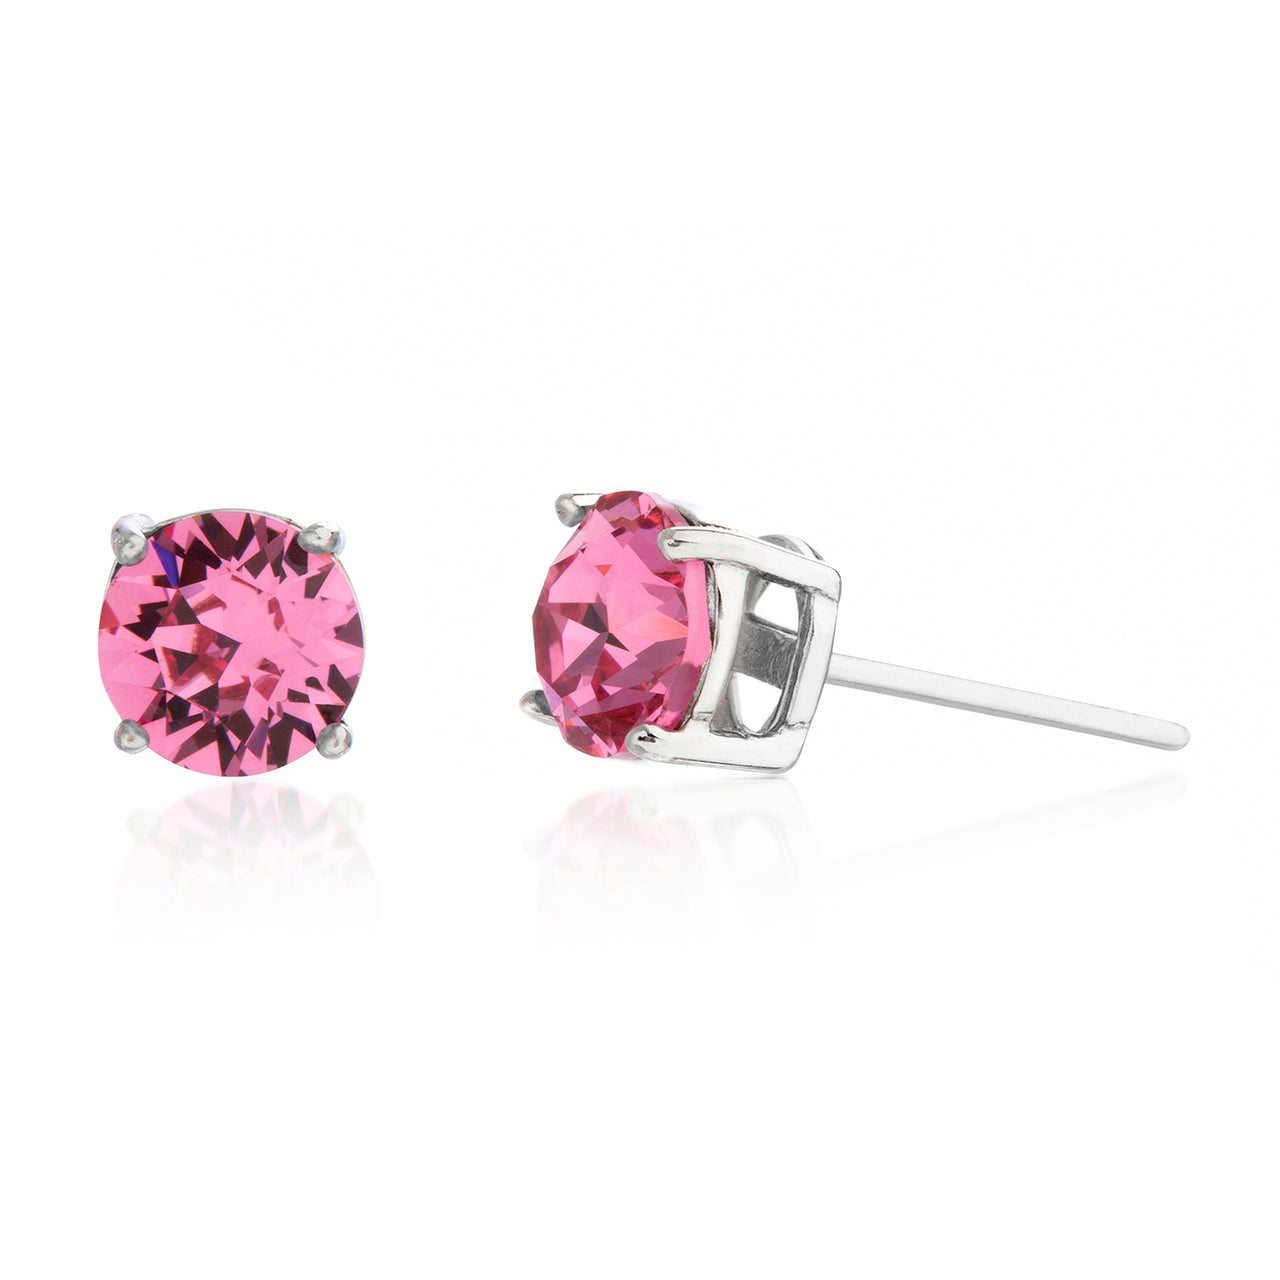 Lesa  Michele  Pink  Crystal  Stud  Earring  in  Rhodium  Plated  Sterling  Silver